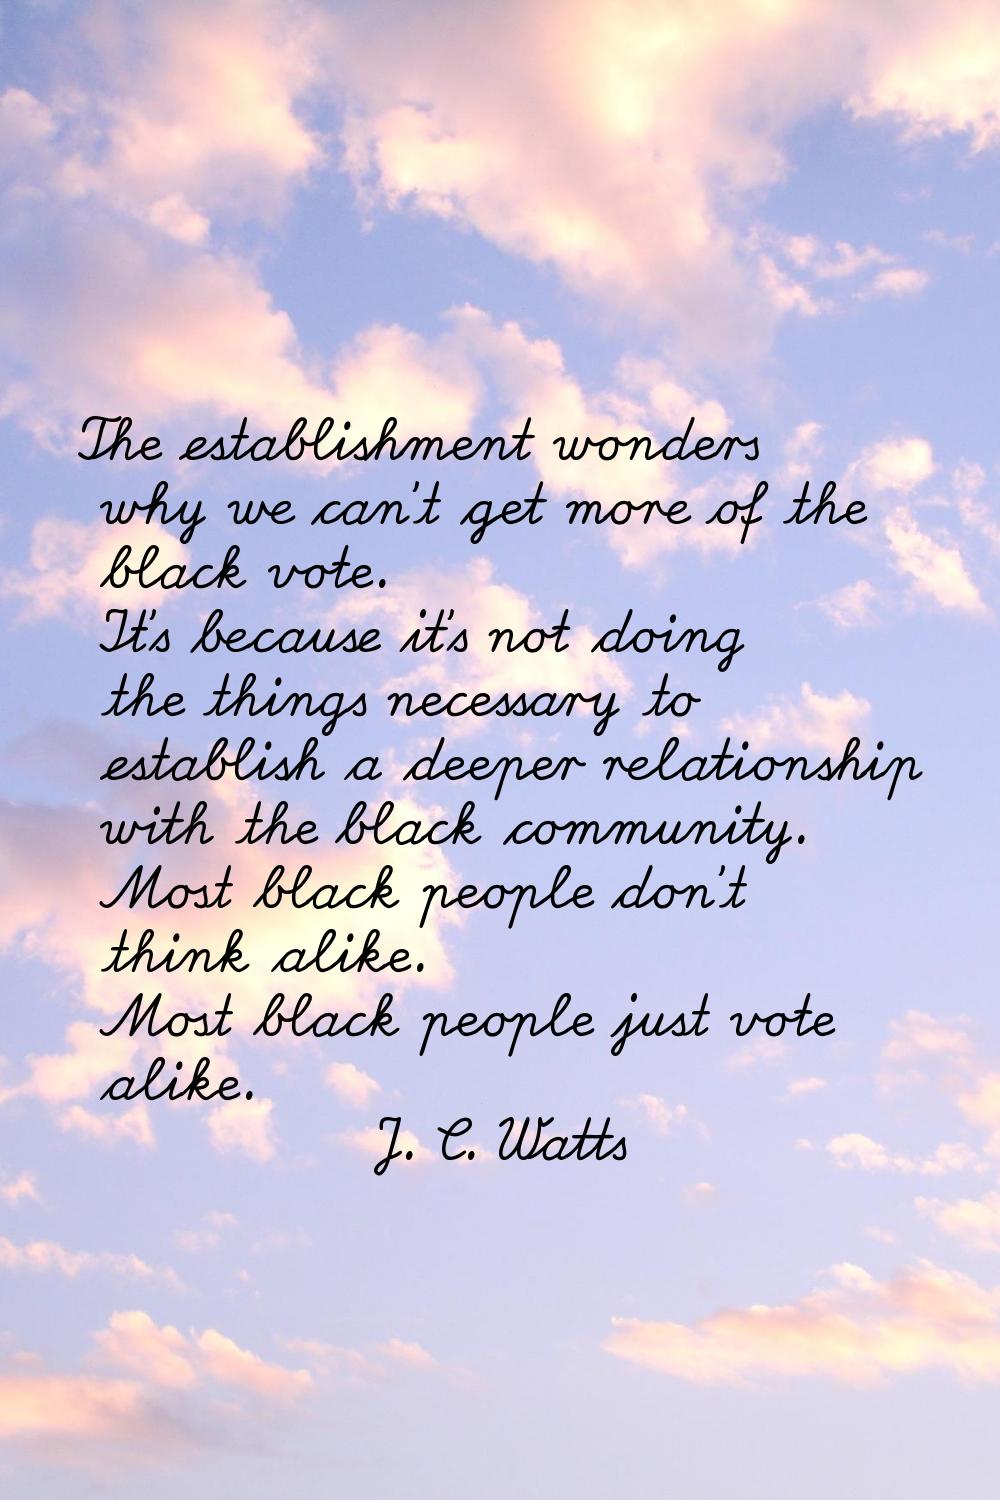 The establishment wonders why we can't get more of the black vote. It's because it's not doing the 